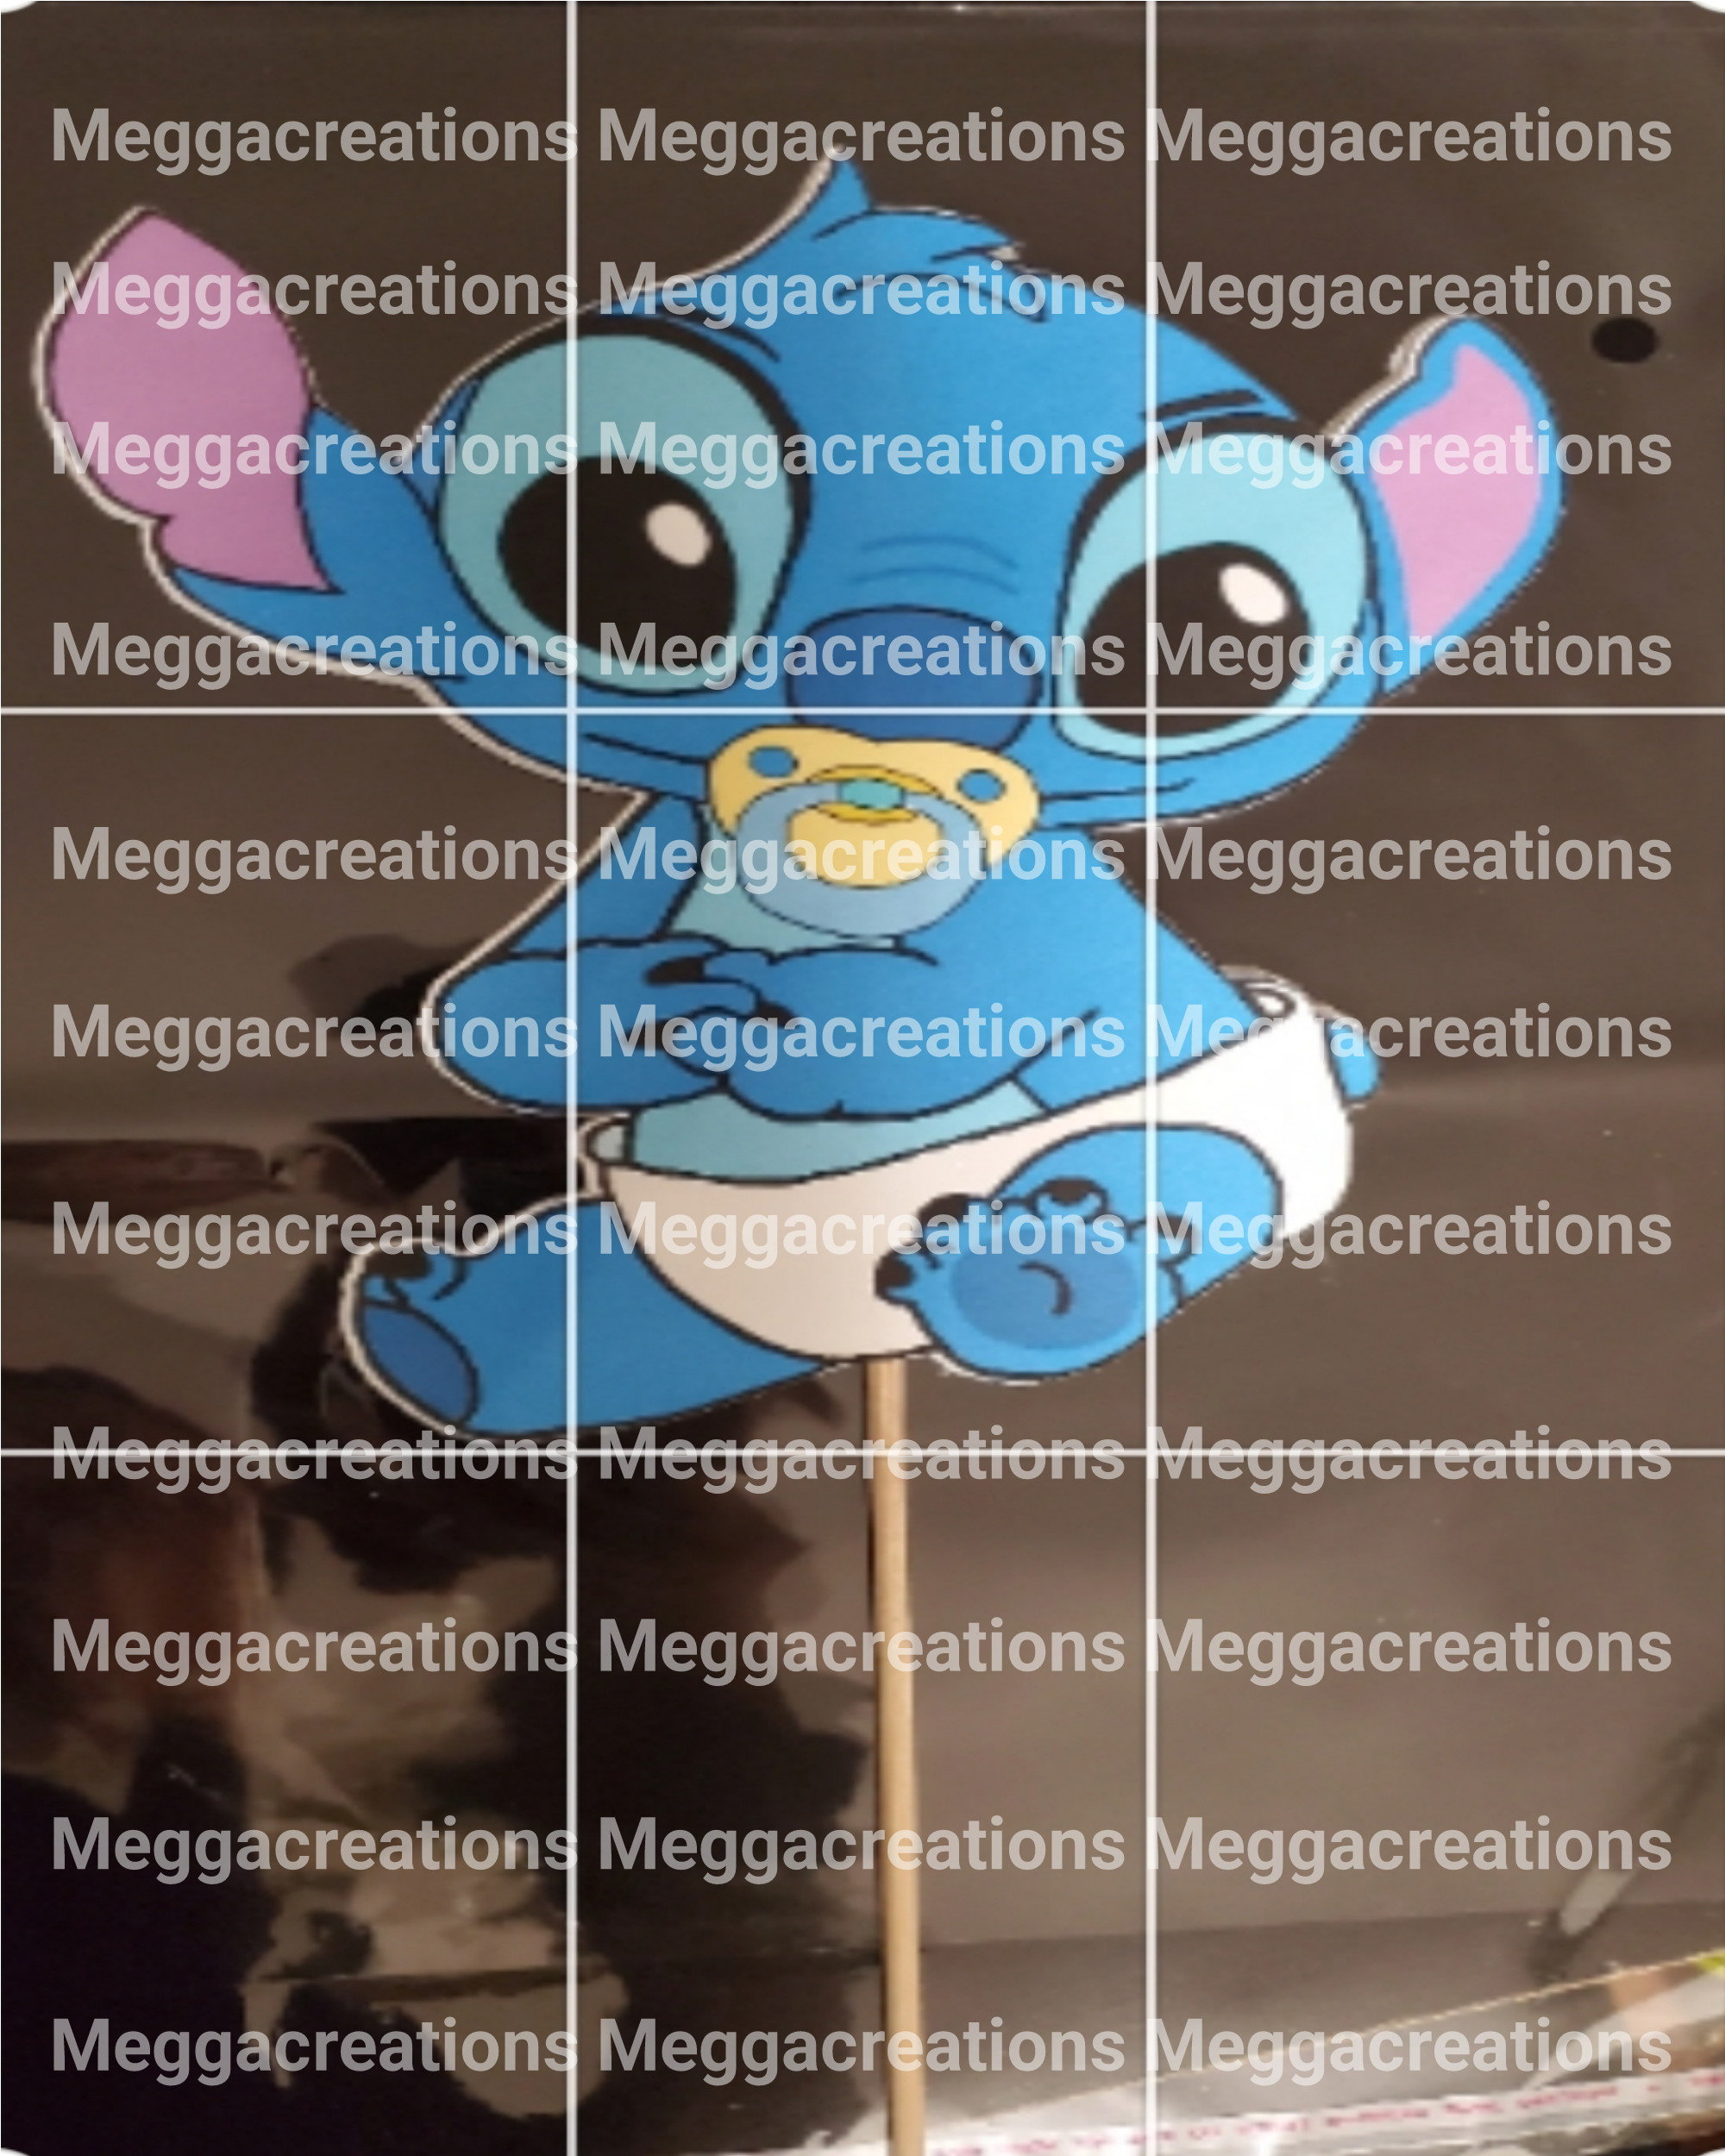 Stitch Cake Cupcake Topper Set Featuring Stitch in Various Poses